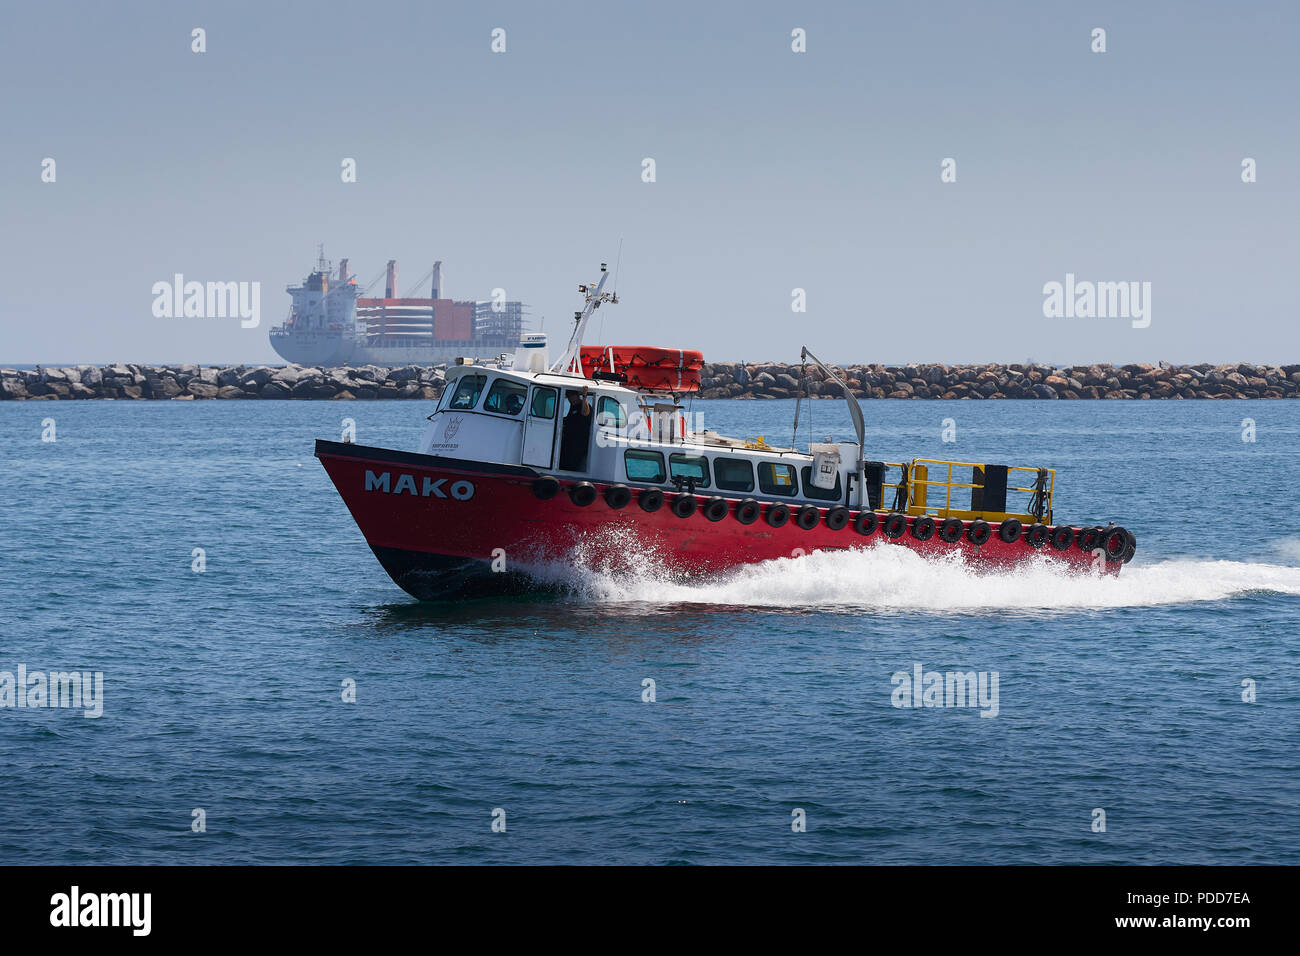 So Cal Ship Services Launch, MAKO, Under Way In The Port Of Long Beach, The Federal Breakwater And An Anchored Cargo Ship Behind. Stock Photo